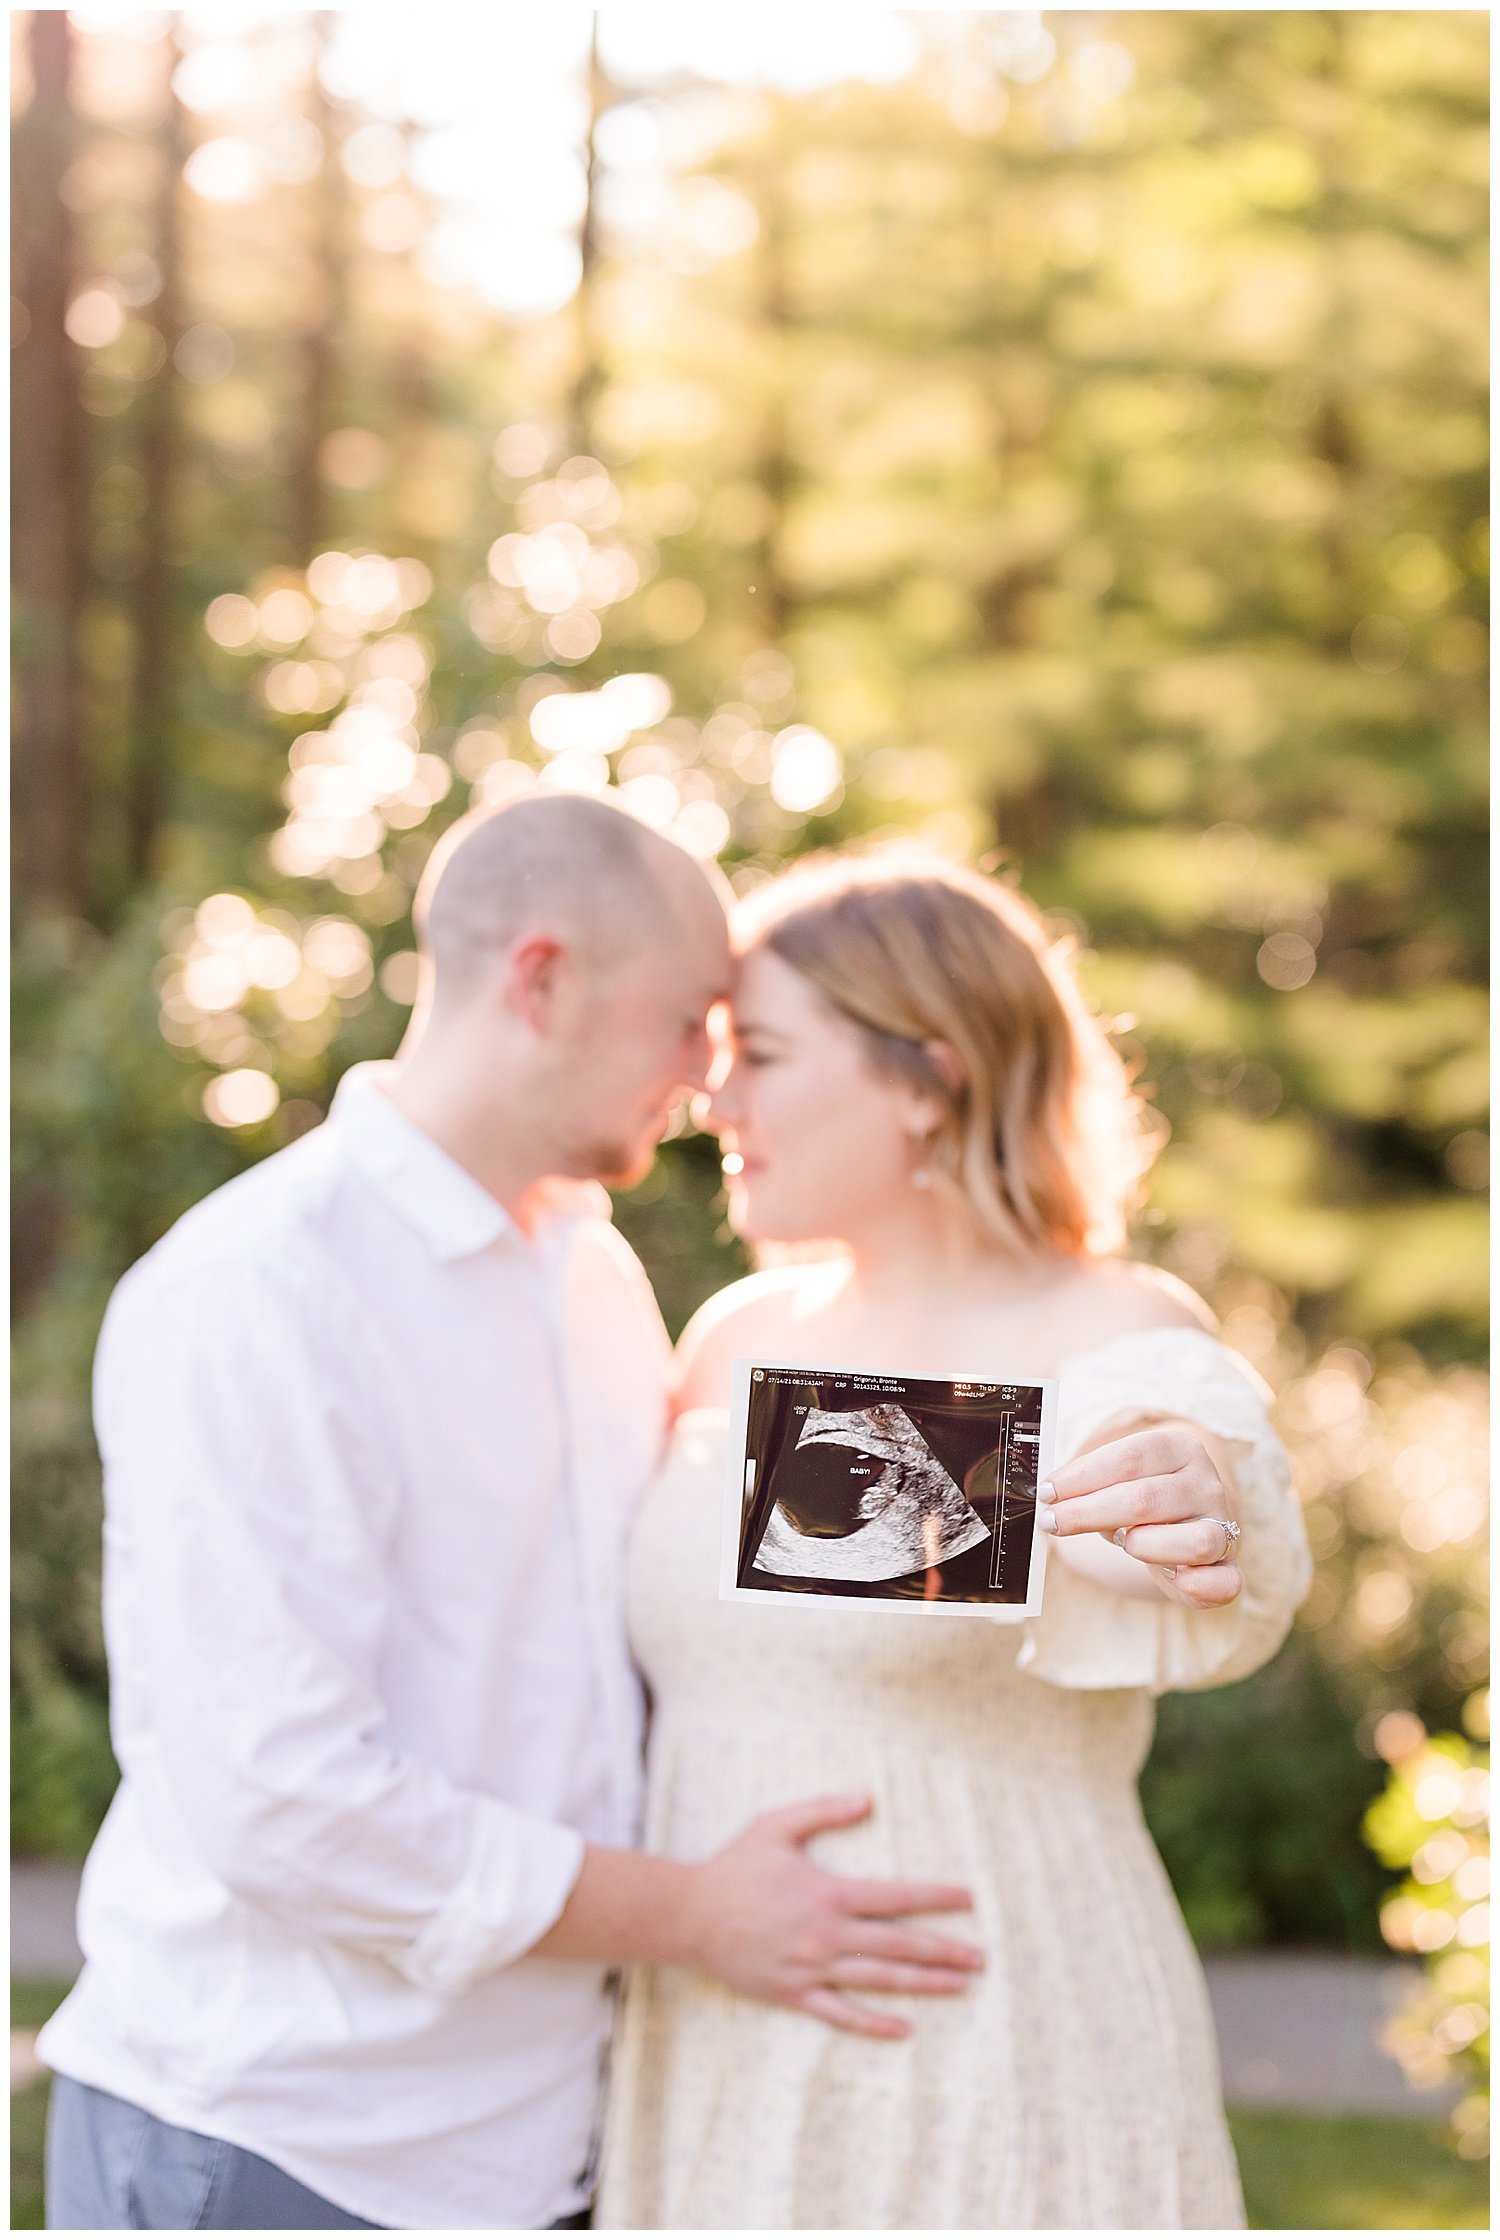 Longwood-Gardens-Pregnancy-Announcement-by-Swiger-Photography-4.jpg